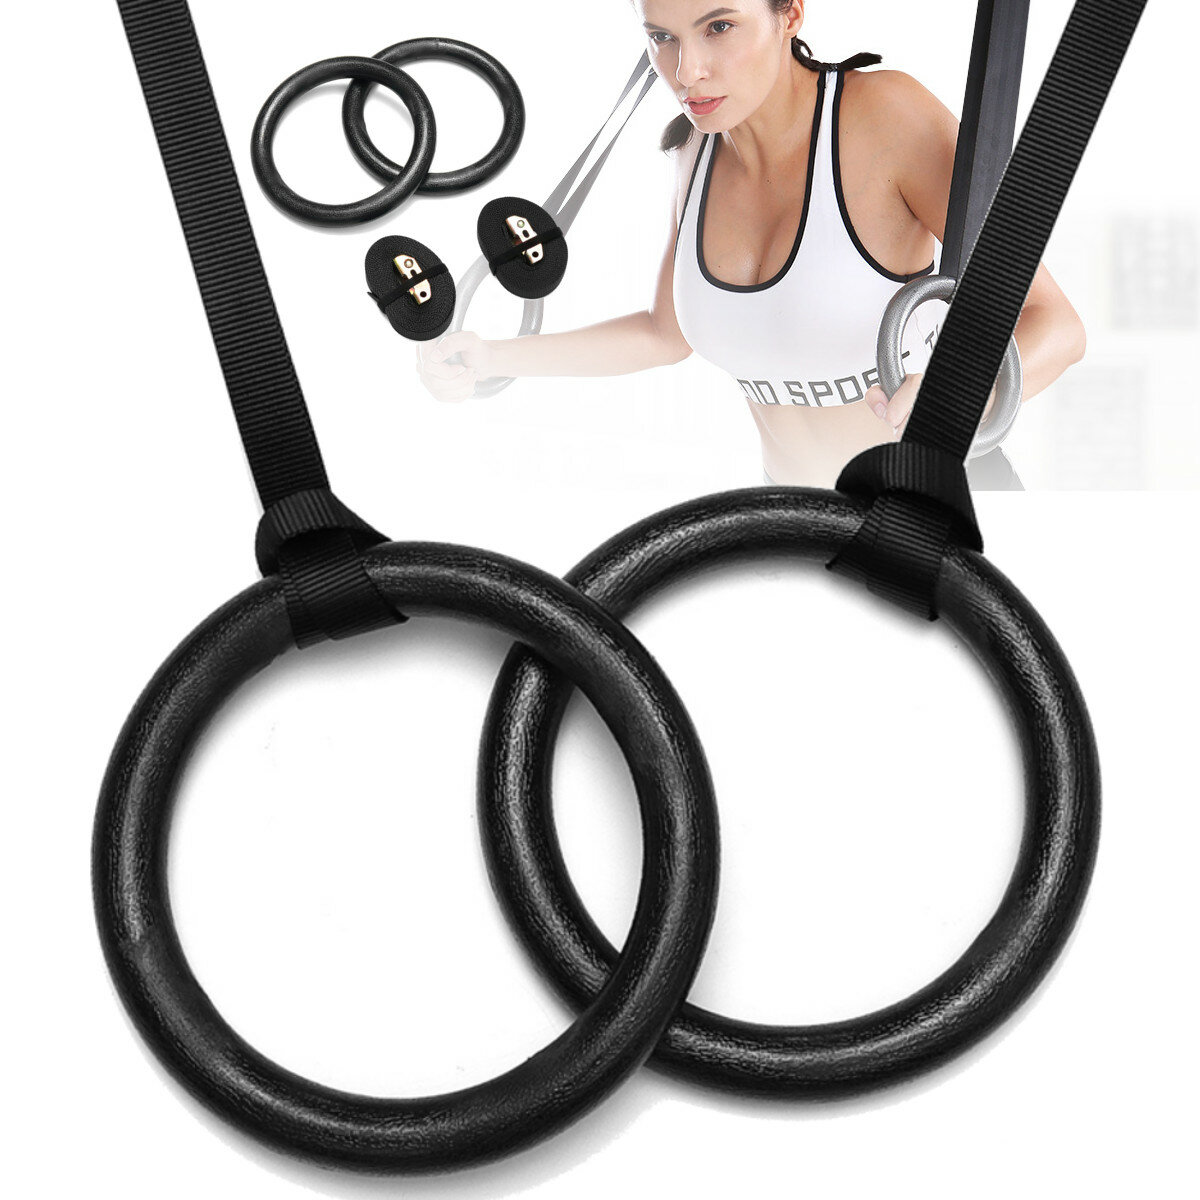 

KALOAD Fitness Gymnastic Rings Gymnastics Training Sports Competiton Suspension Rings Outdoor Home Fitness Rings